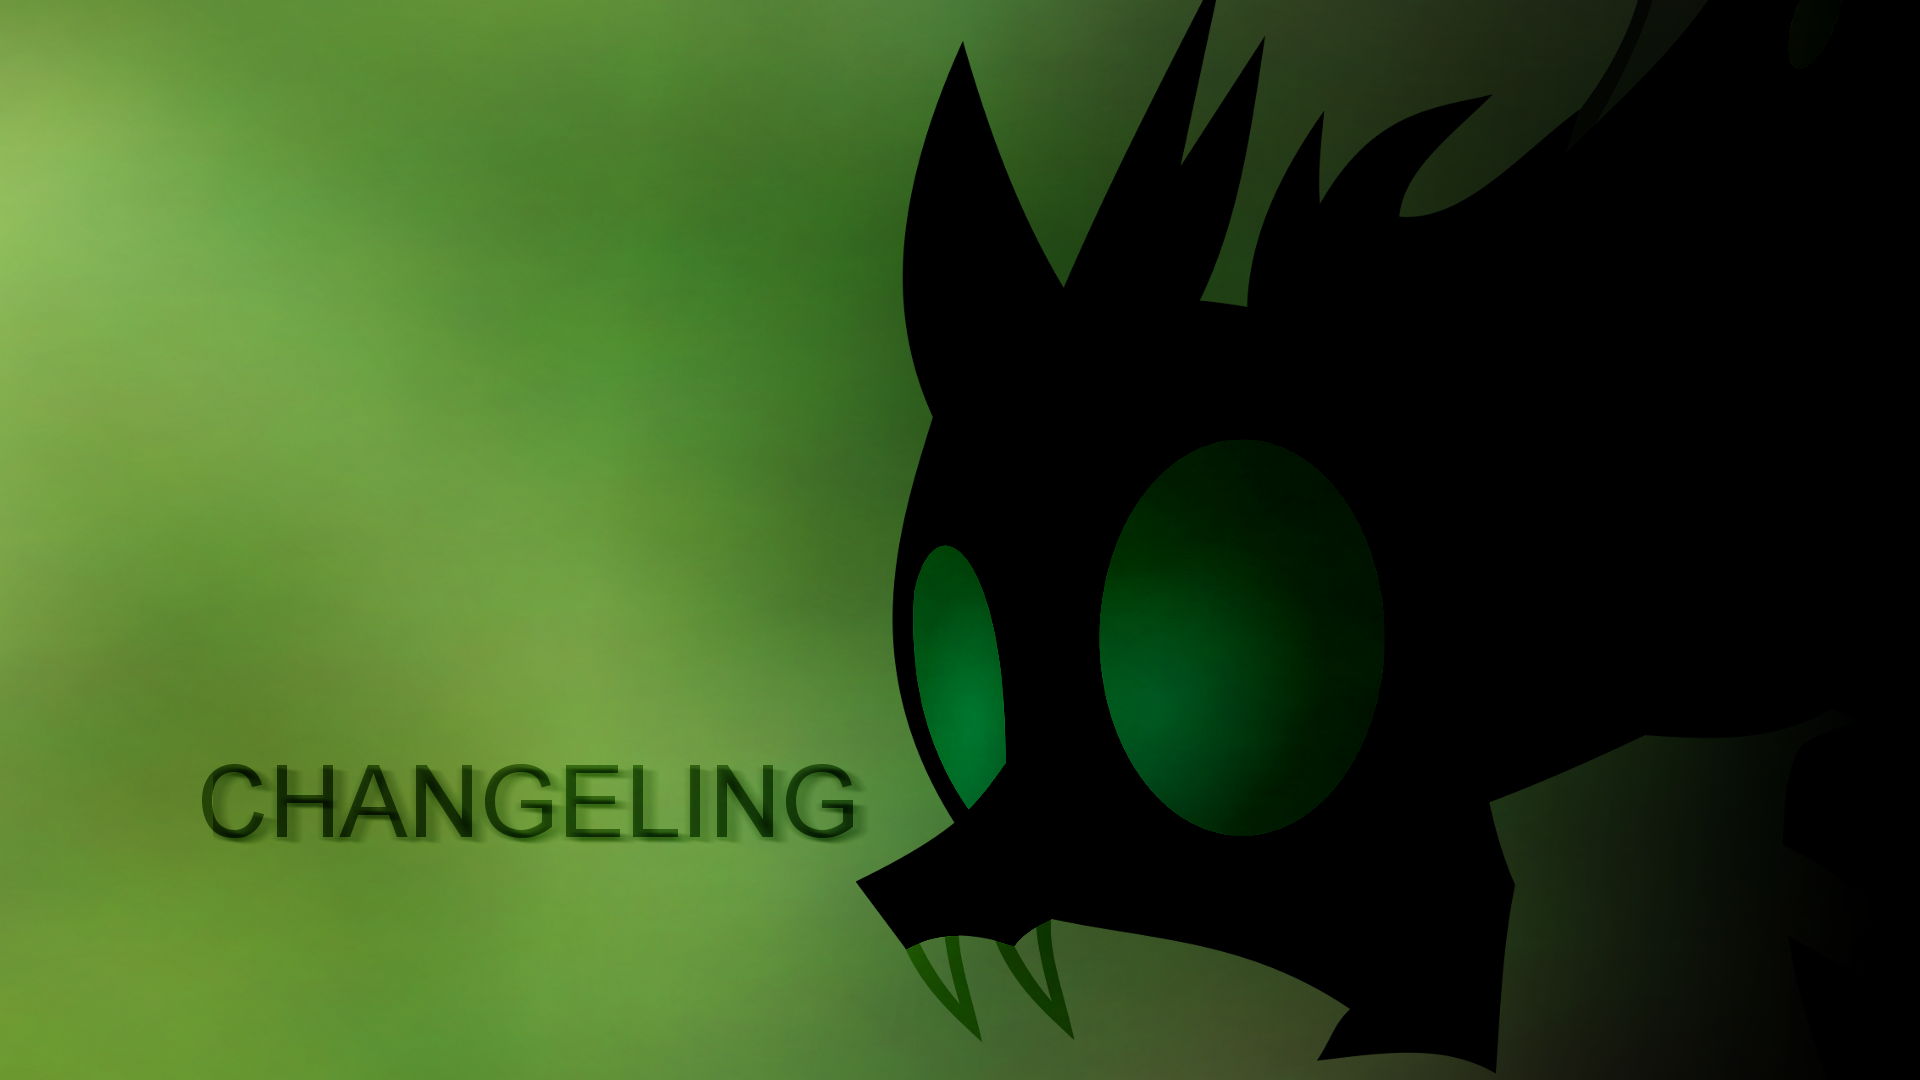 Changeling wallpaper by iCammo